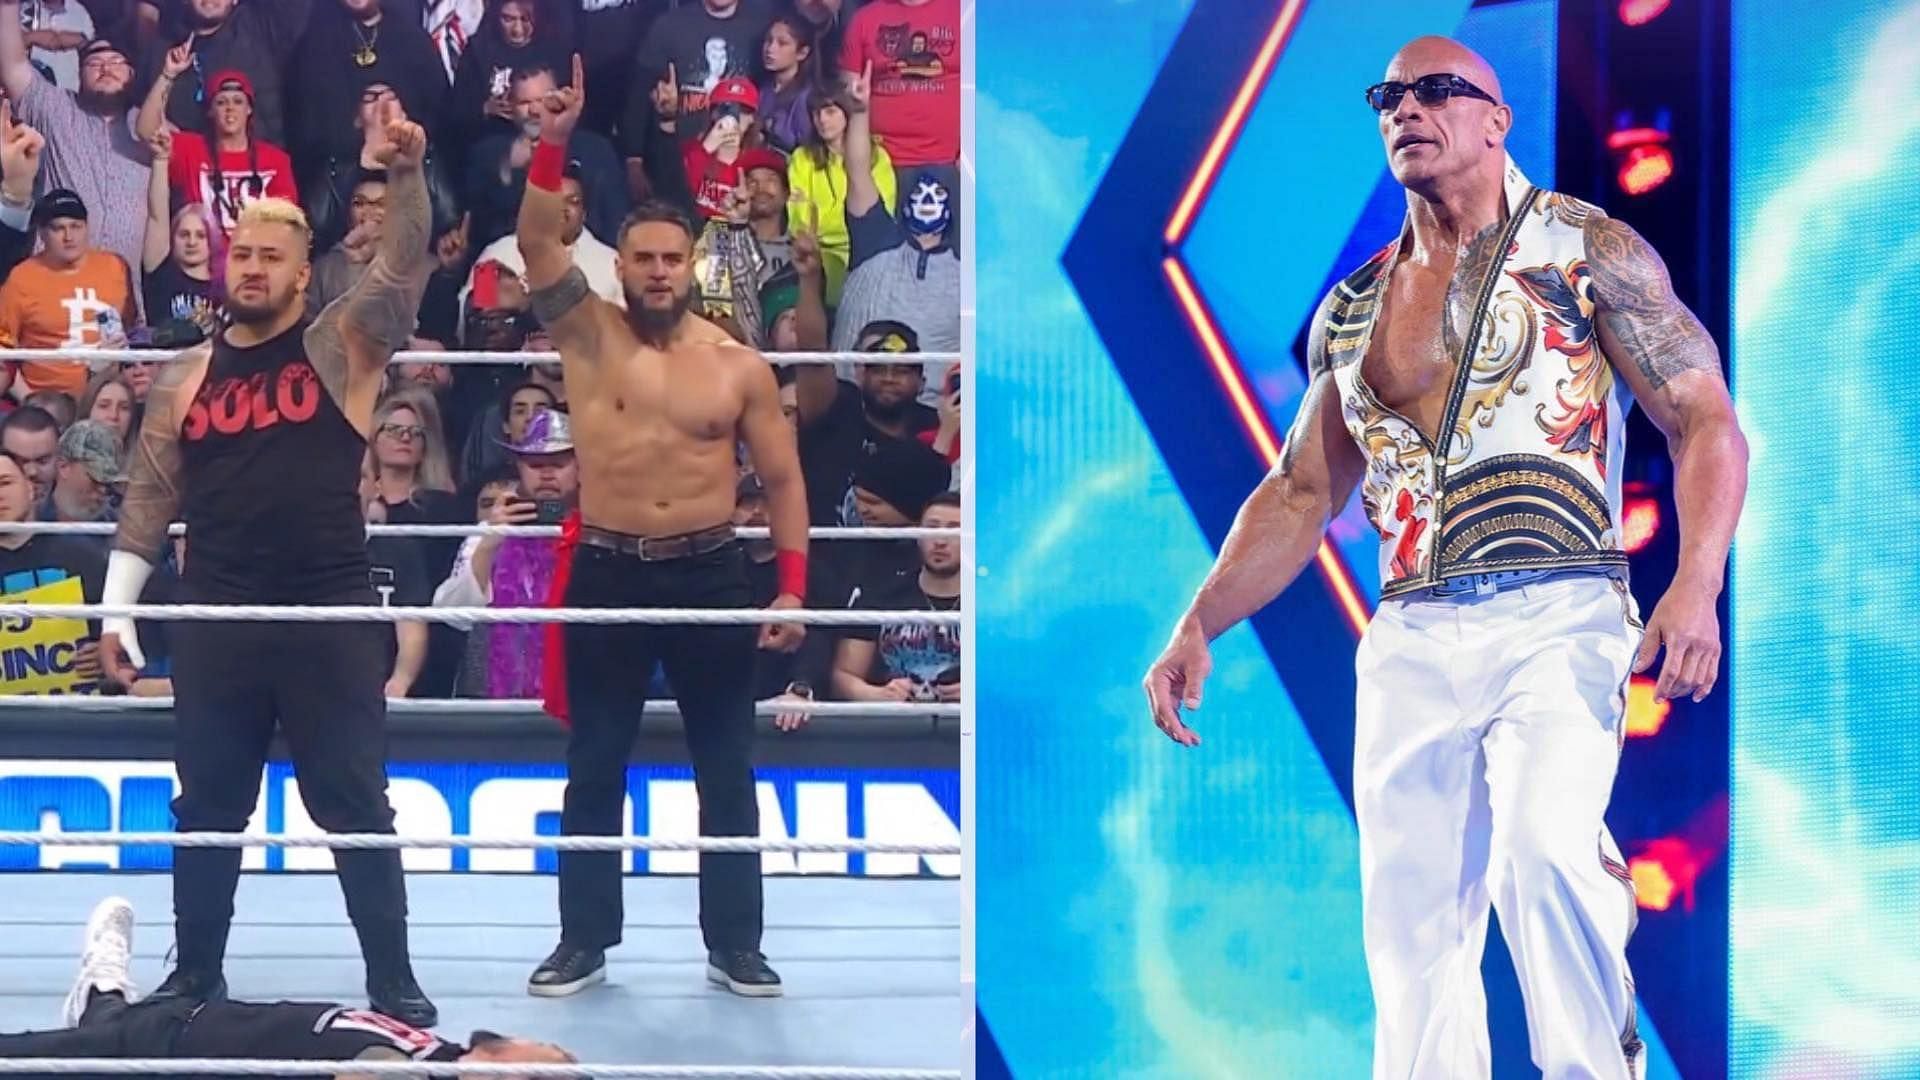 There have been major changes made to The Bloodline on WWE SmackDown